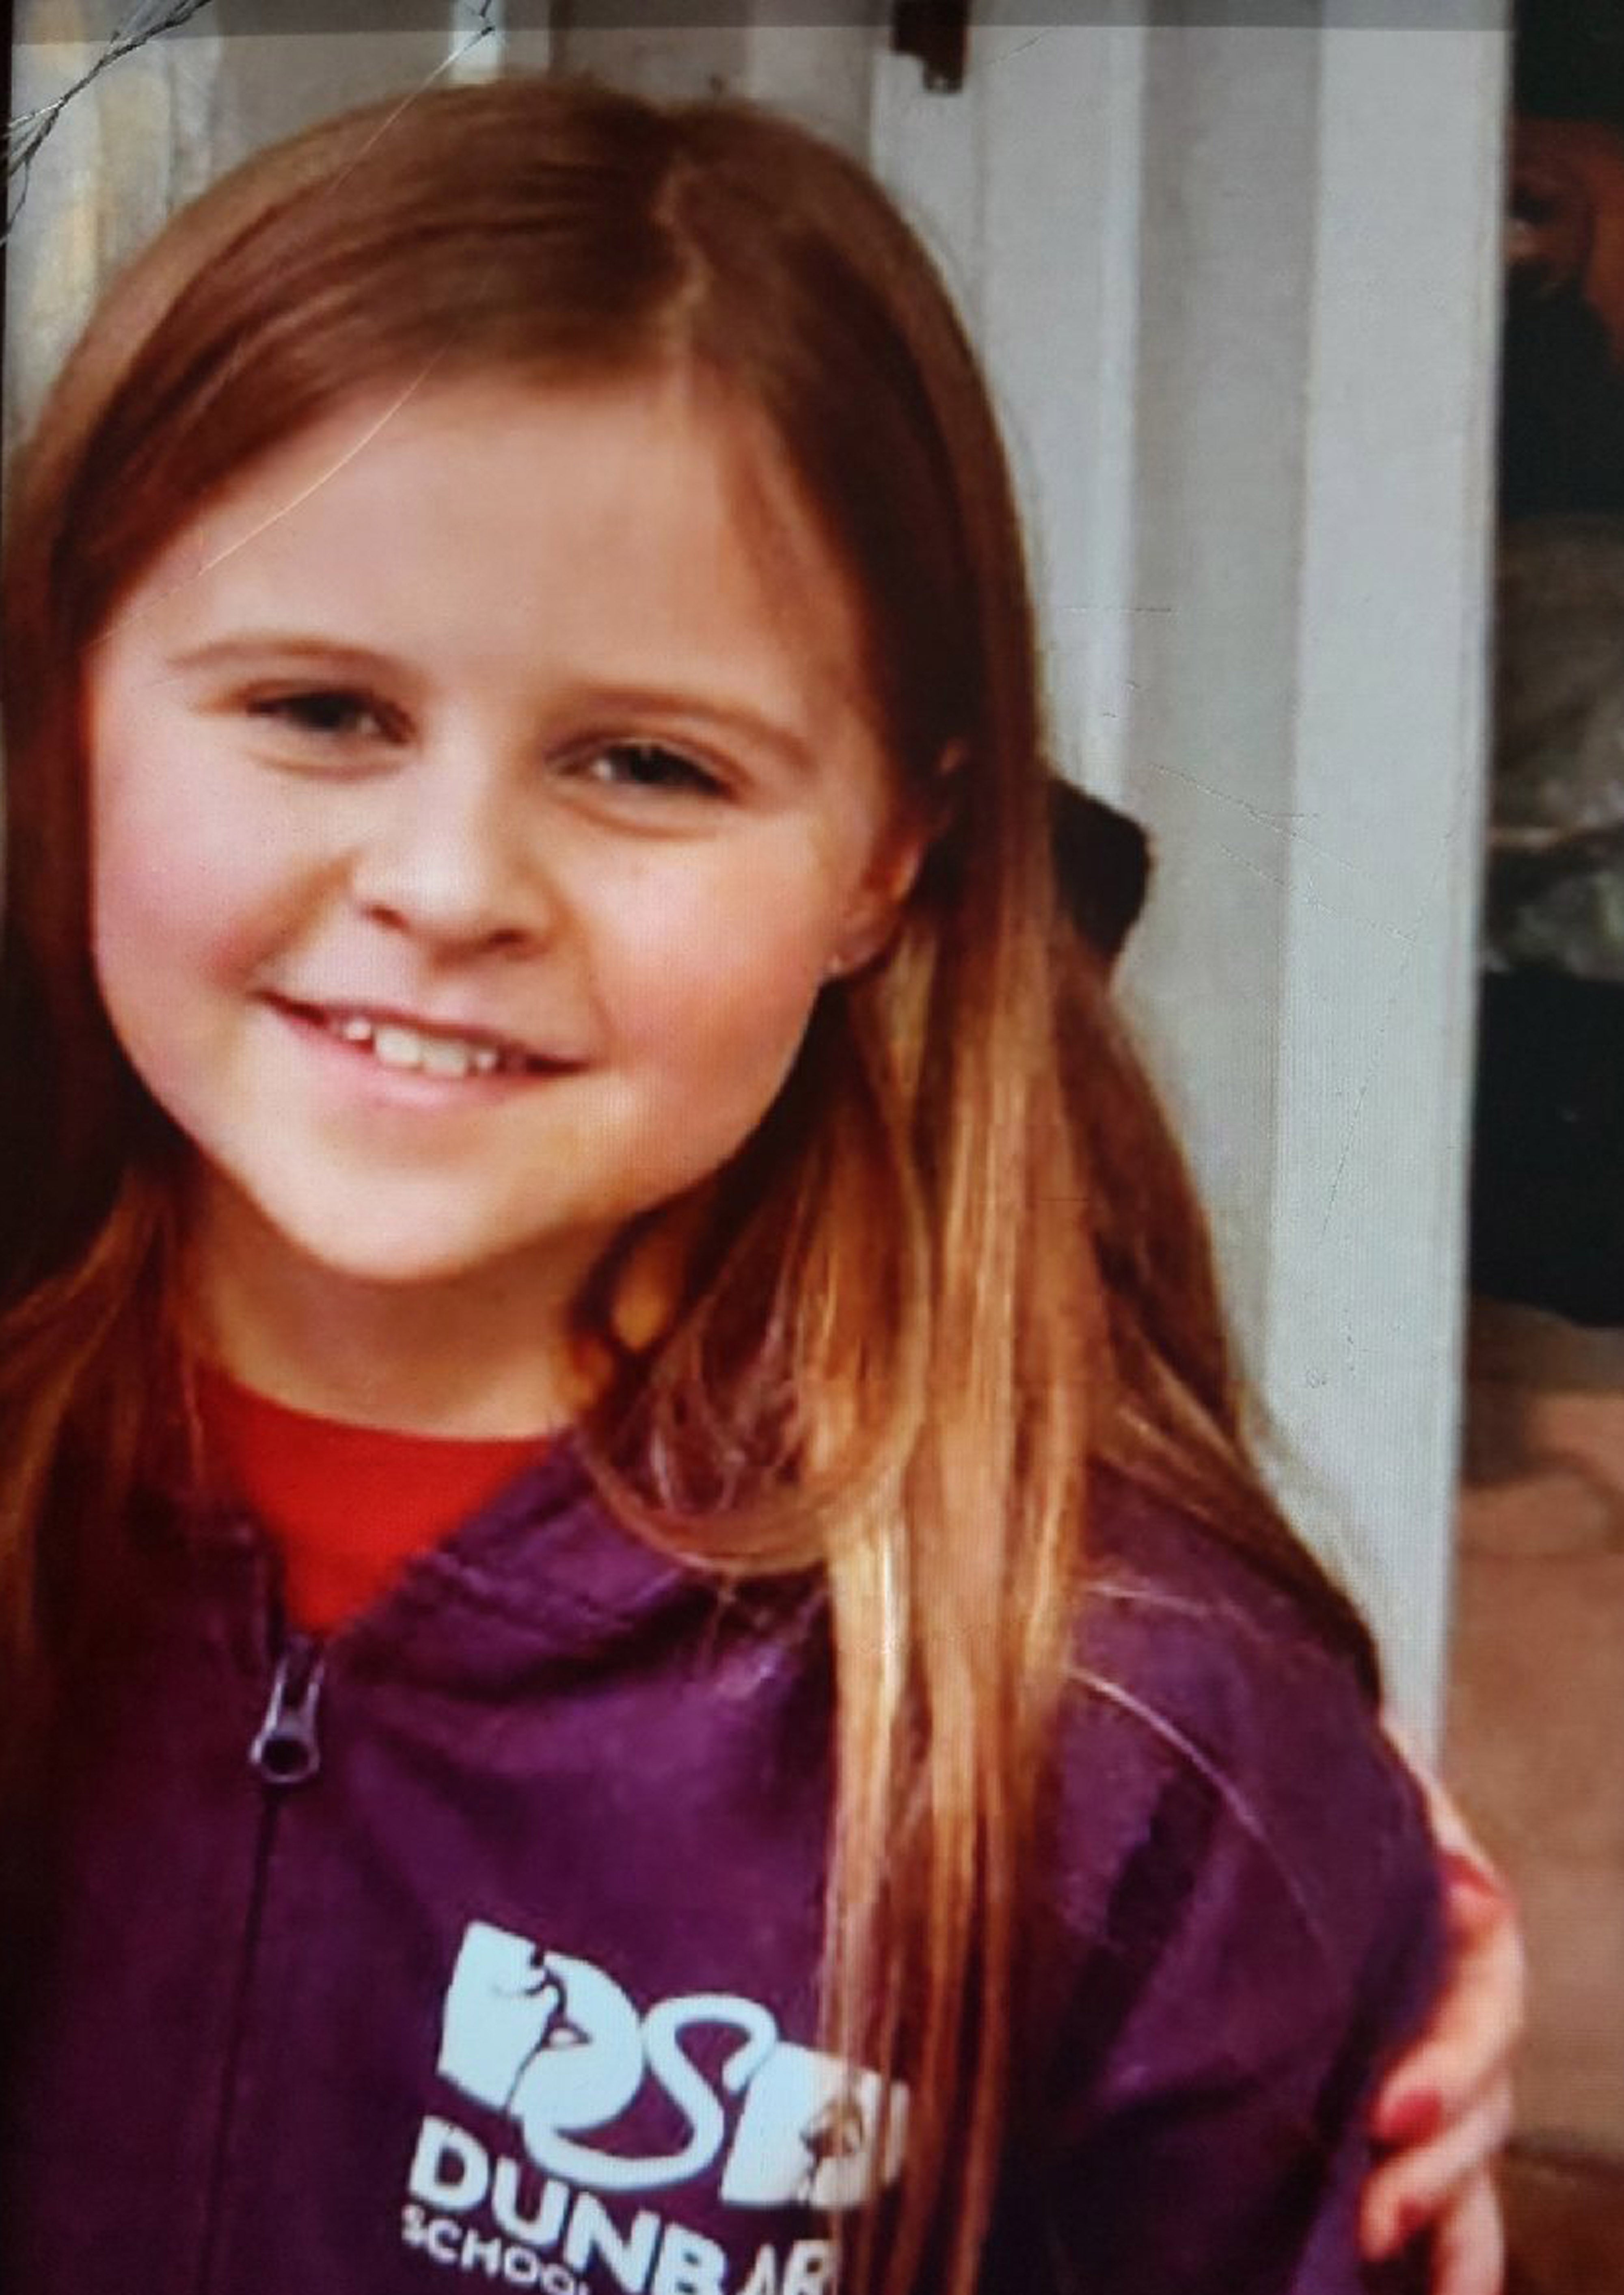 Handout photo issued by Police Scotland of Sophia Timms who was was last seen at about 8.30am on Belhaven Road, Dunbar